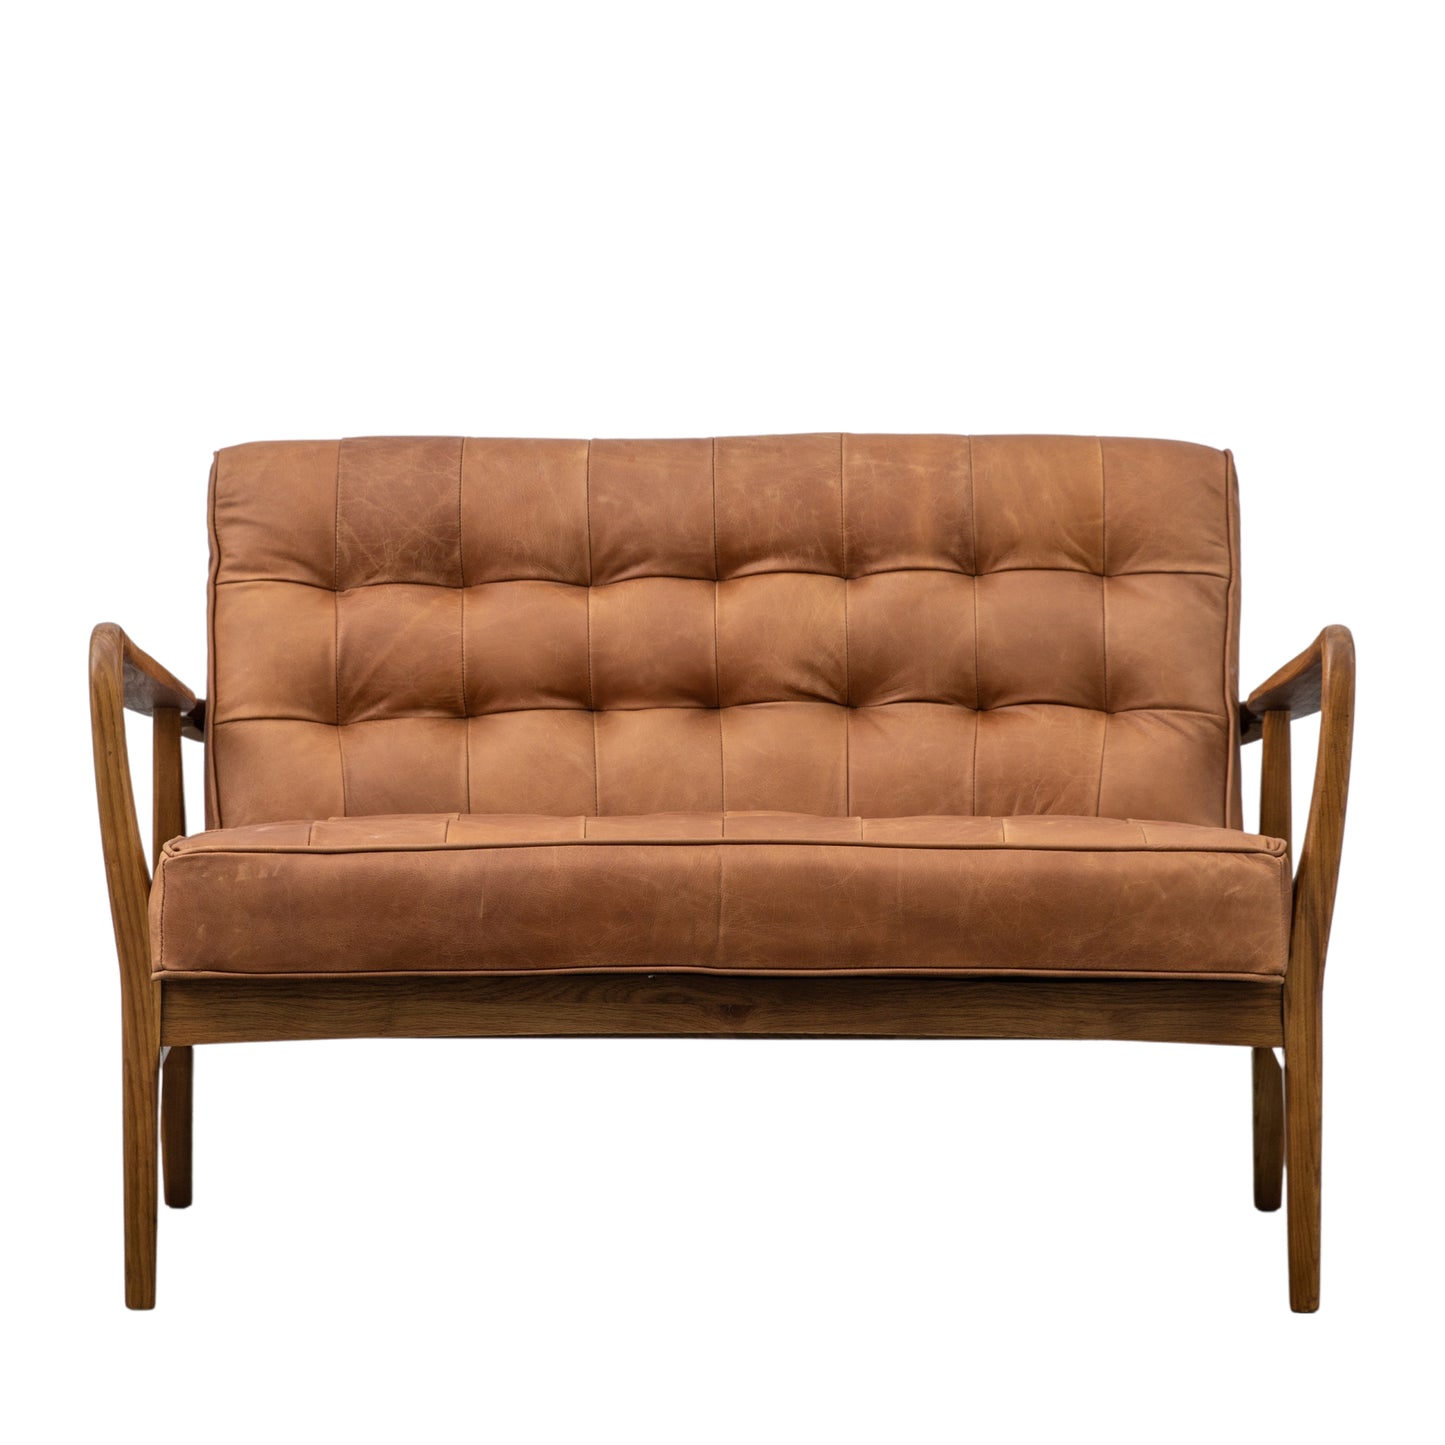 A vintage brown leather 2-seater sofa with wooden legs perfect for interior decor and home furniture.